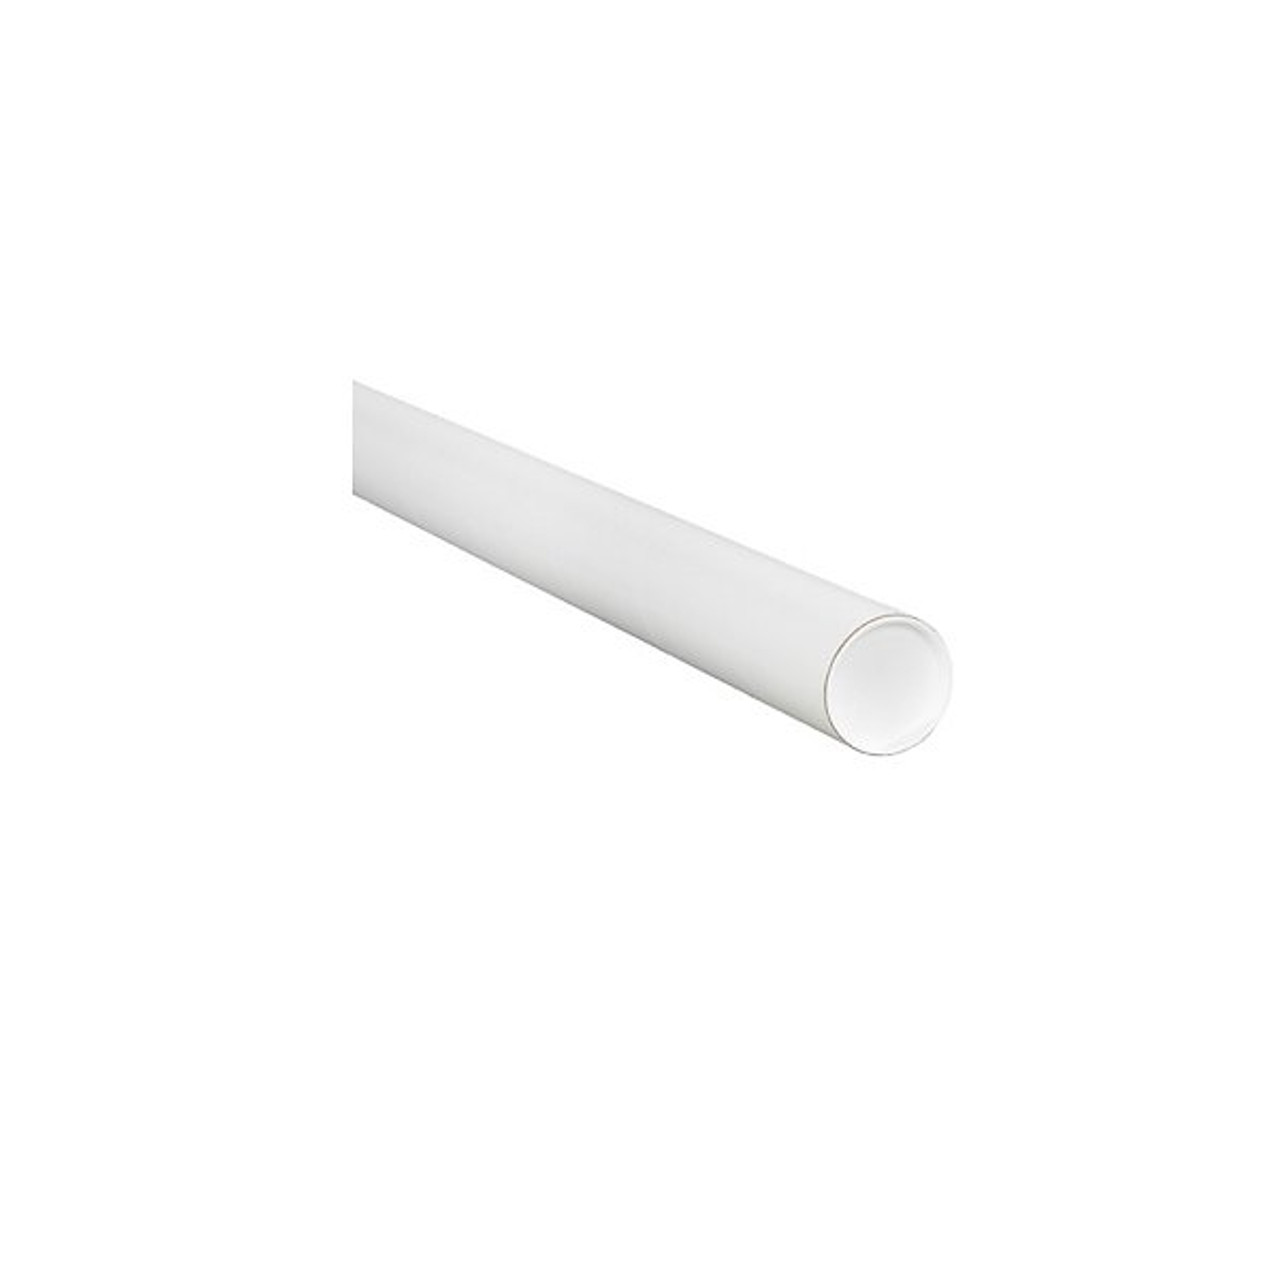 2 1/2 x 48 White Mailing Tubes with Caps Case/34